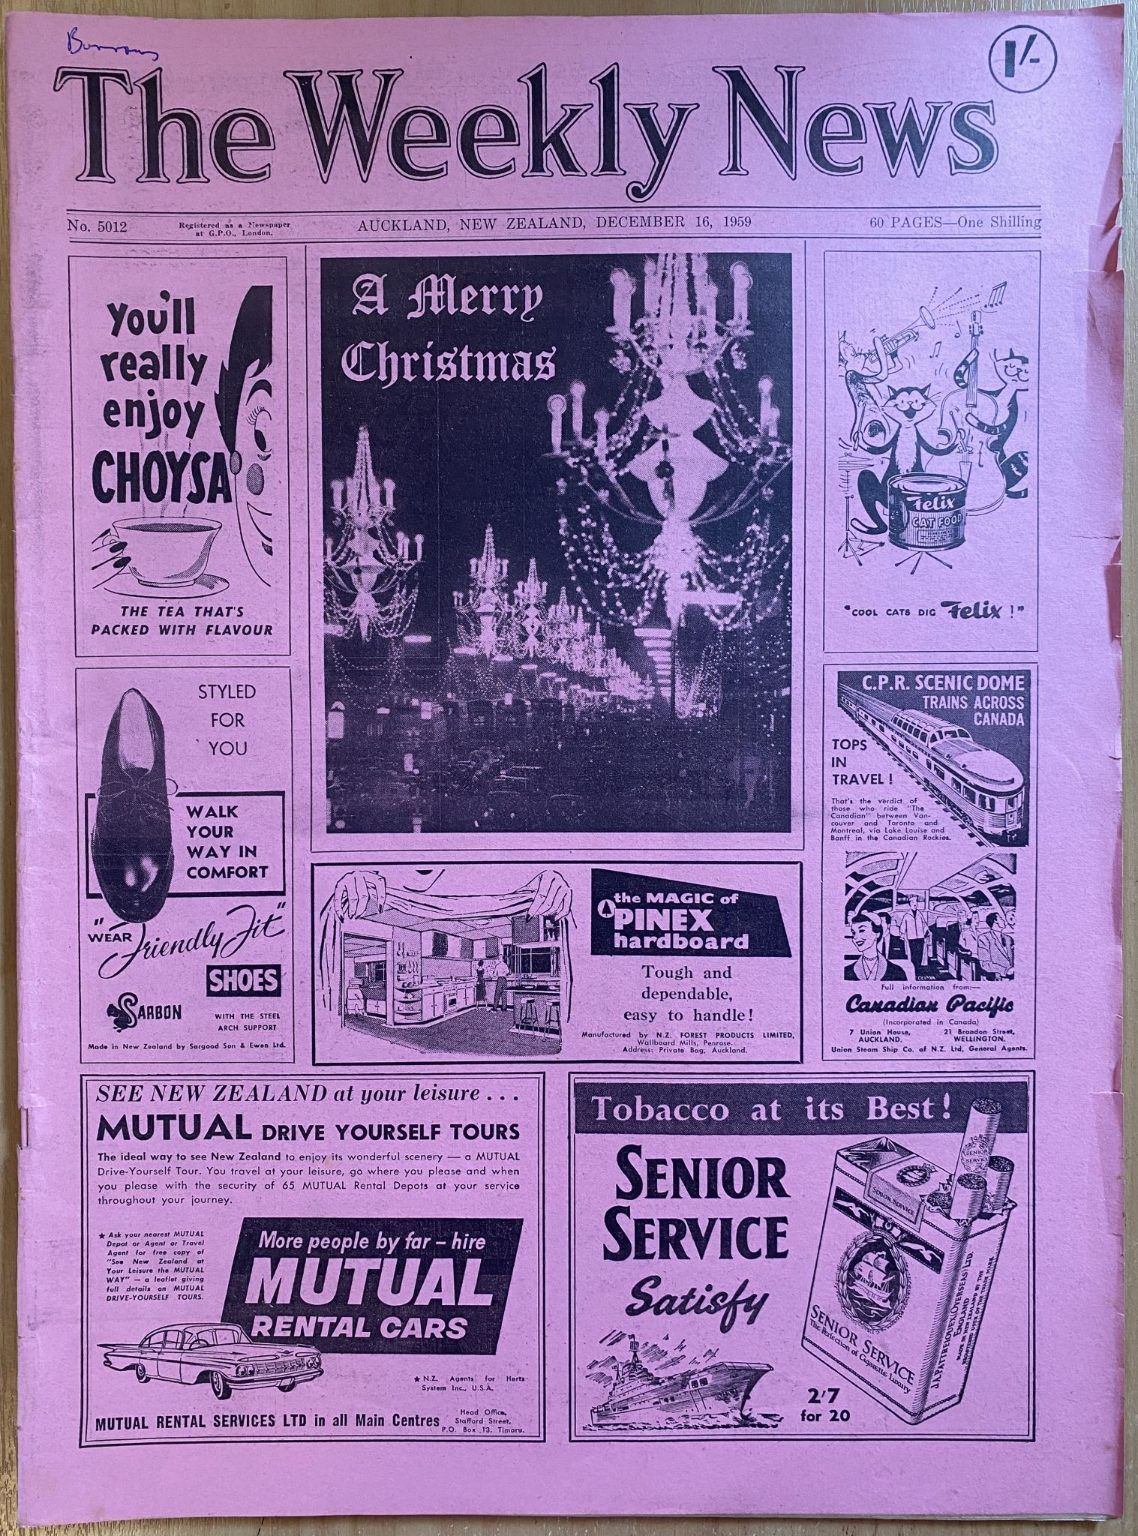 OLD NEWSPAPER: The Weekly News - No. 5012, 16 December 1959